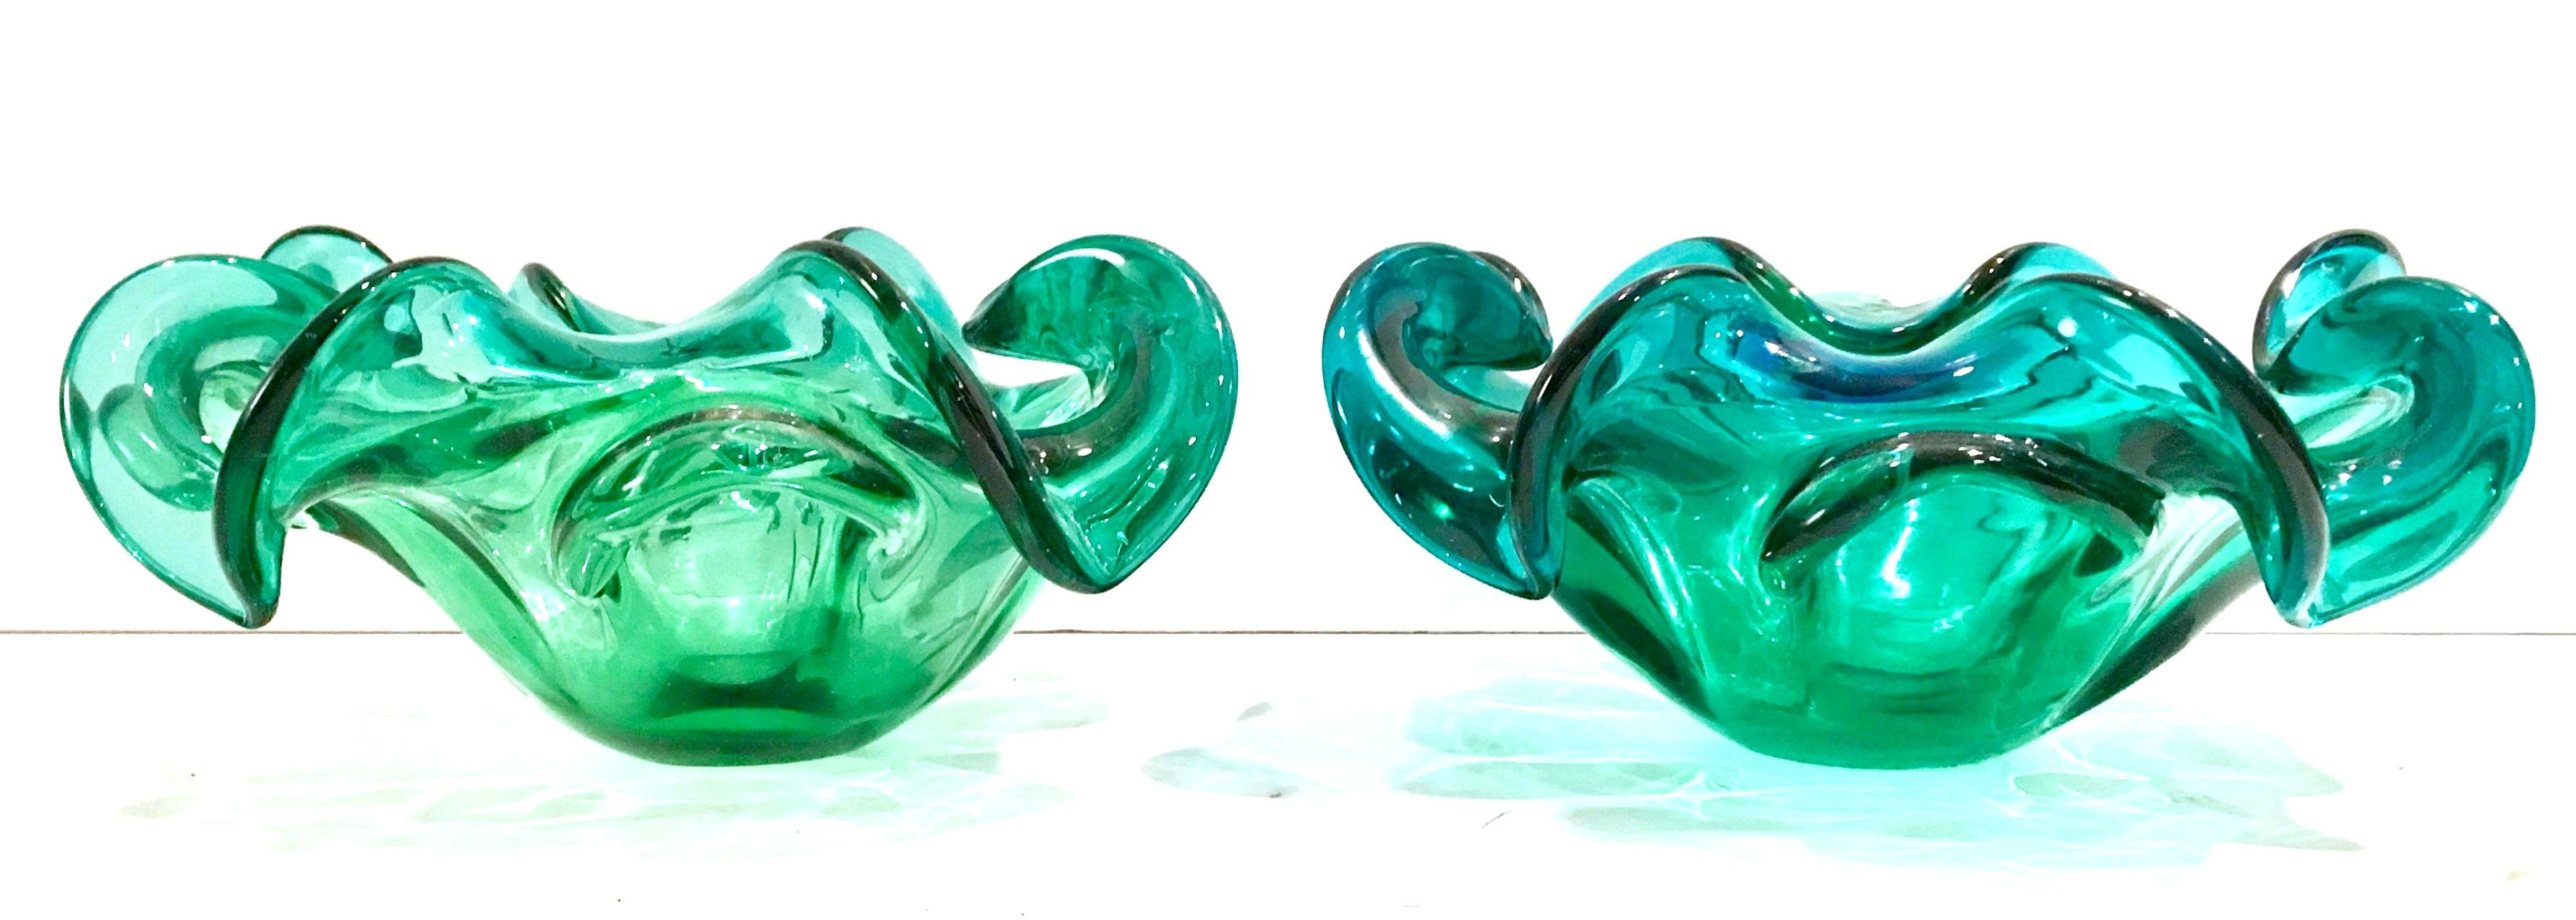 Mid 20th-Century Pair of Italian Murano Style Blown Art Glass Ruffle Bowls. This unique and rare pair of teal green-blue bowls are slightly different in color.